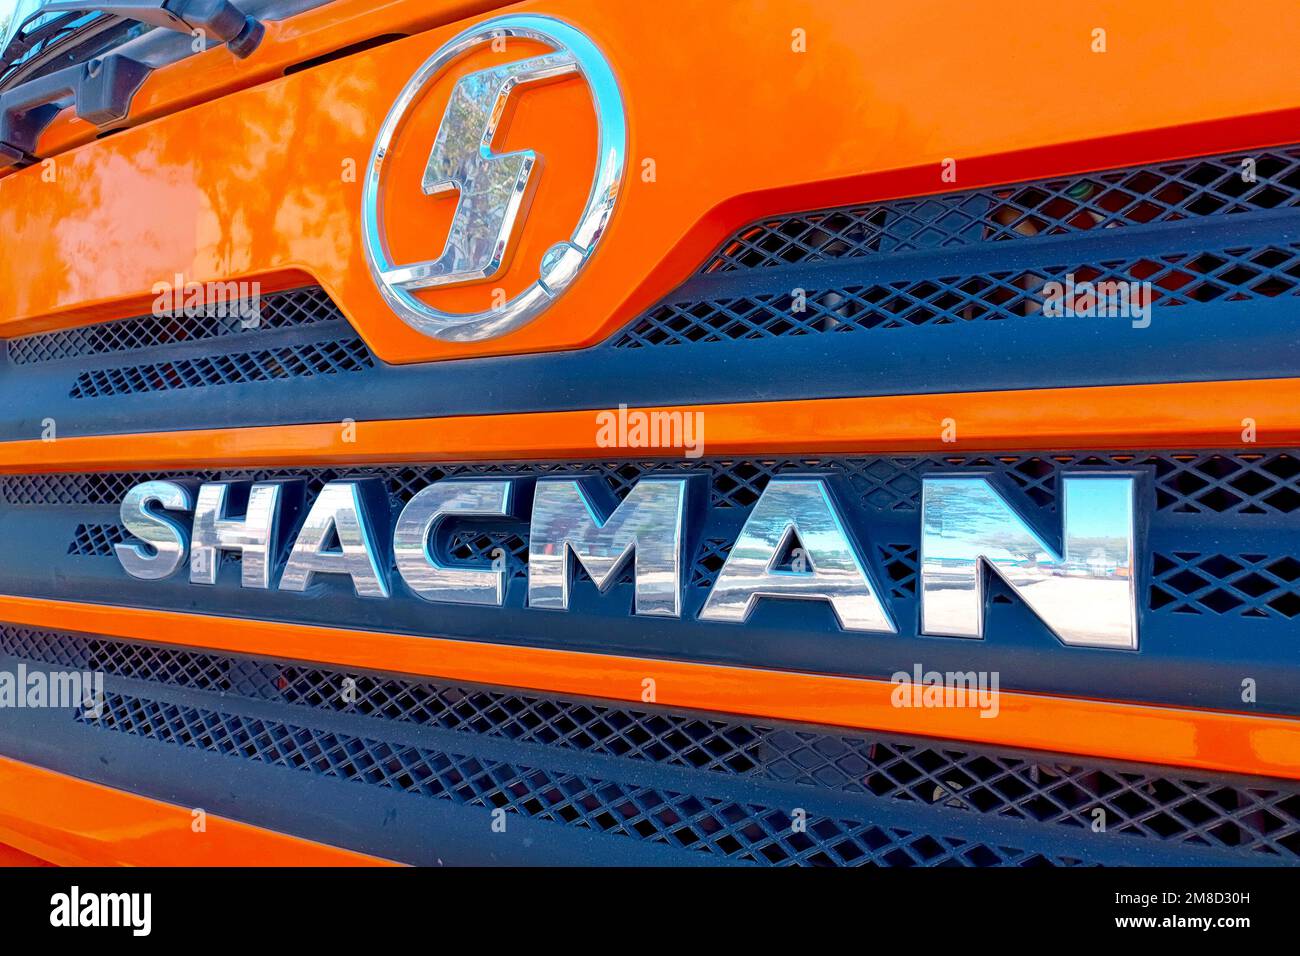 Chinese construction vehicle Shacman brand logo on the orange industrial truck car close up. Stock Photo